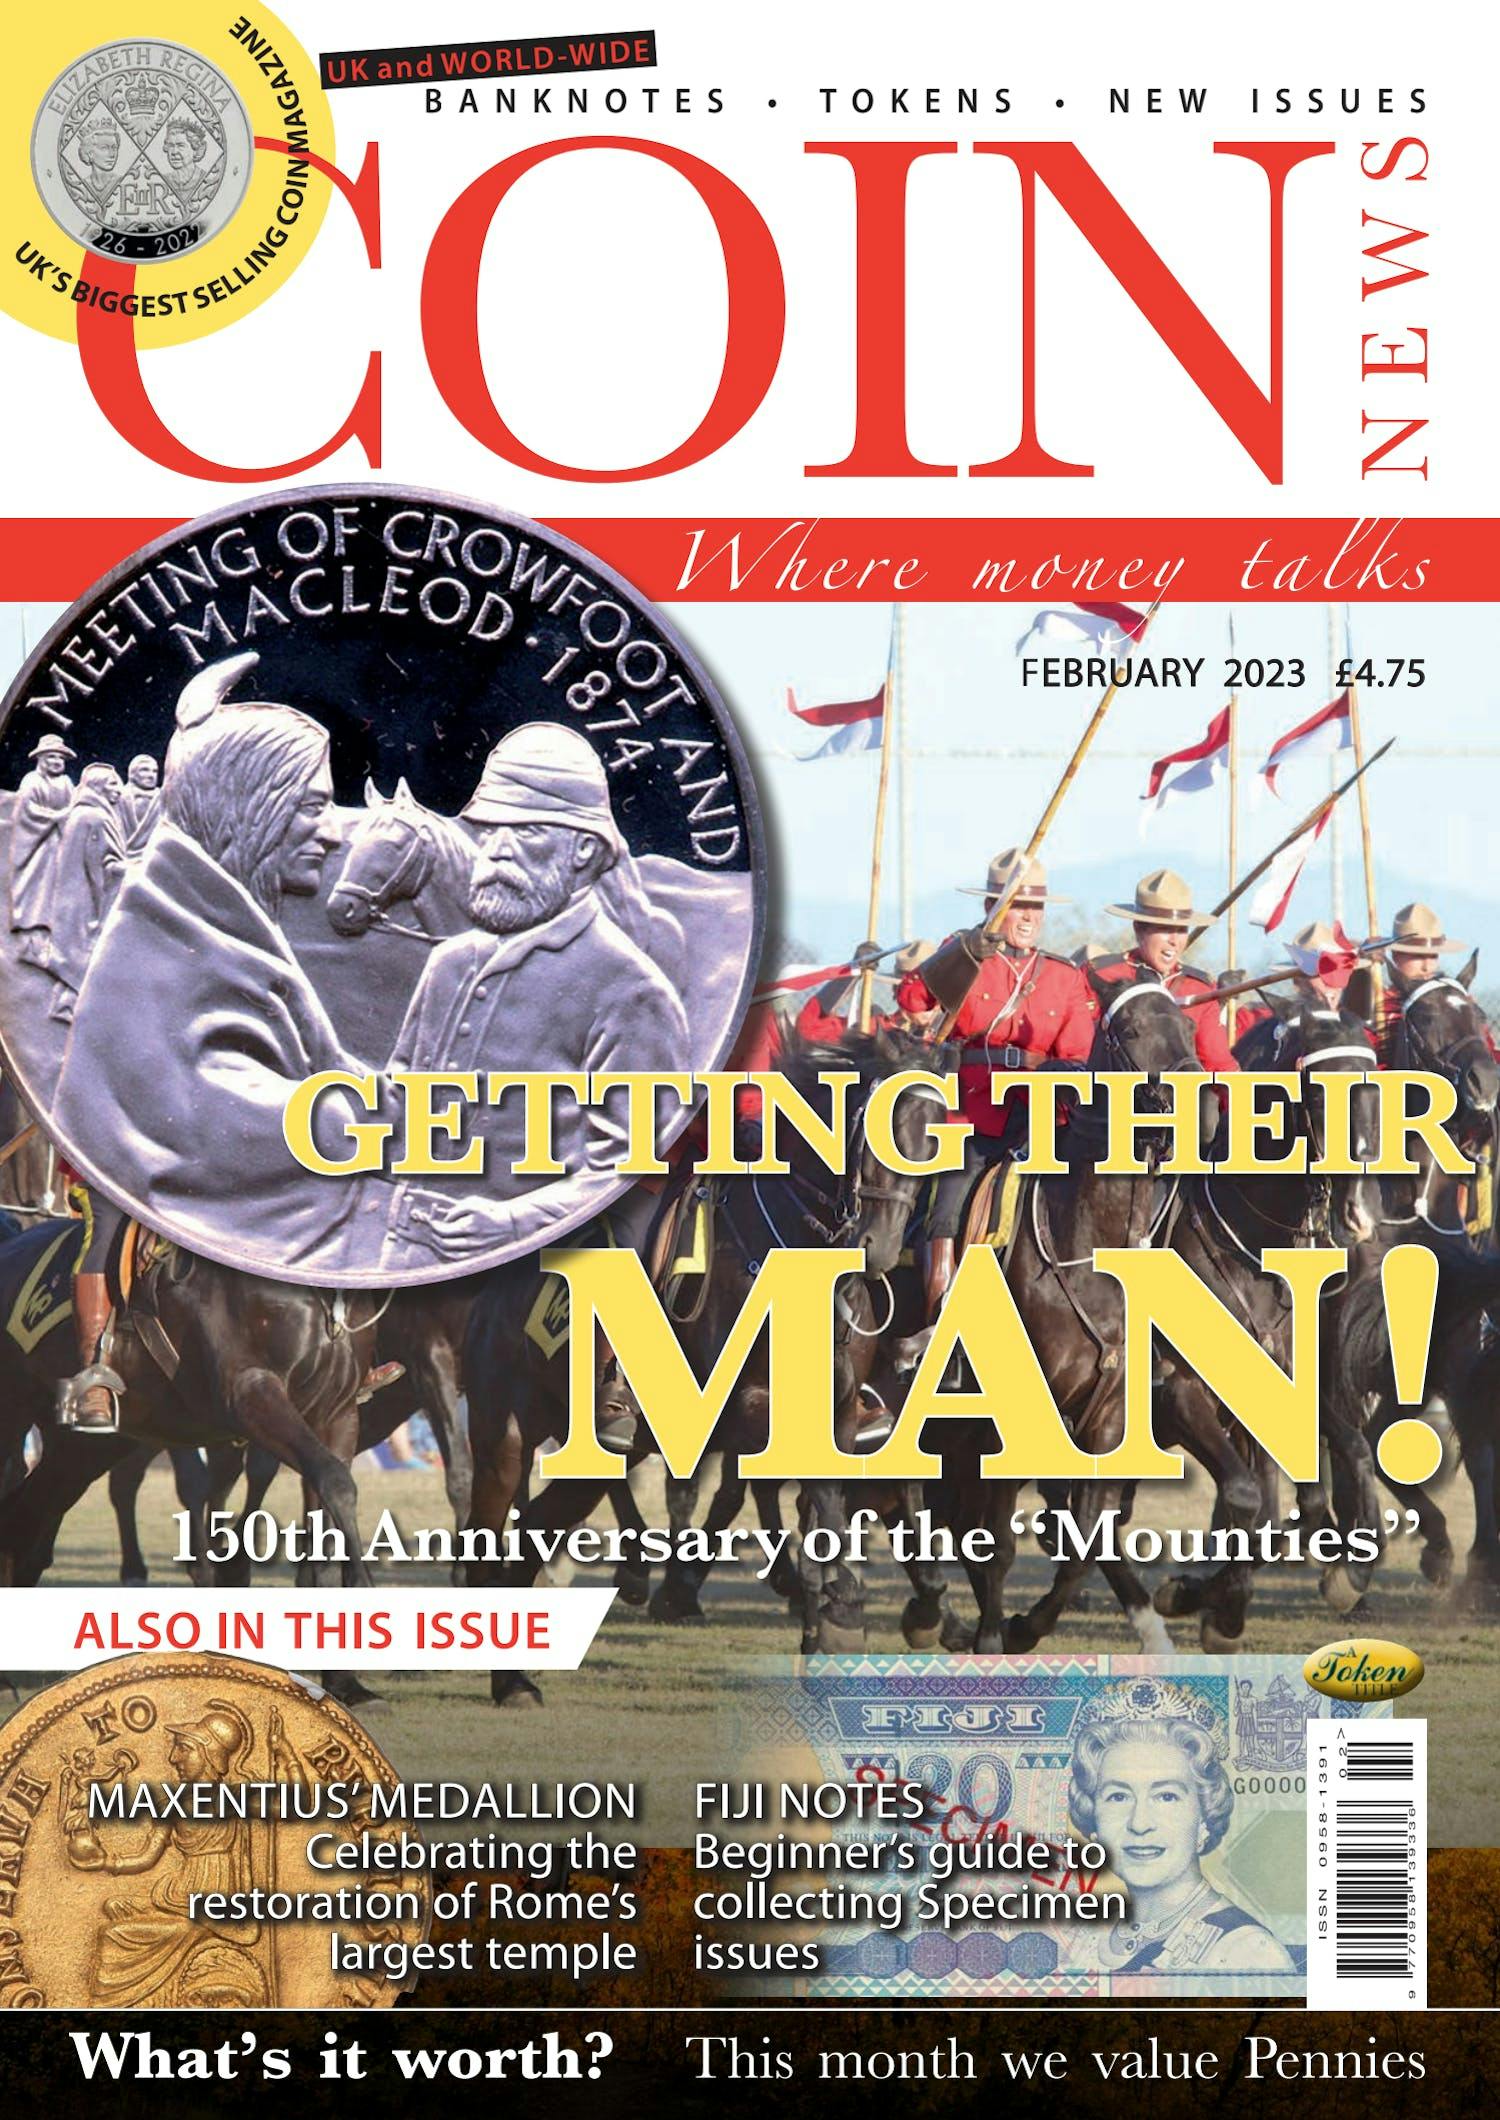 The front cover of Coin News, Volume 60, Number 2, February 2023